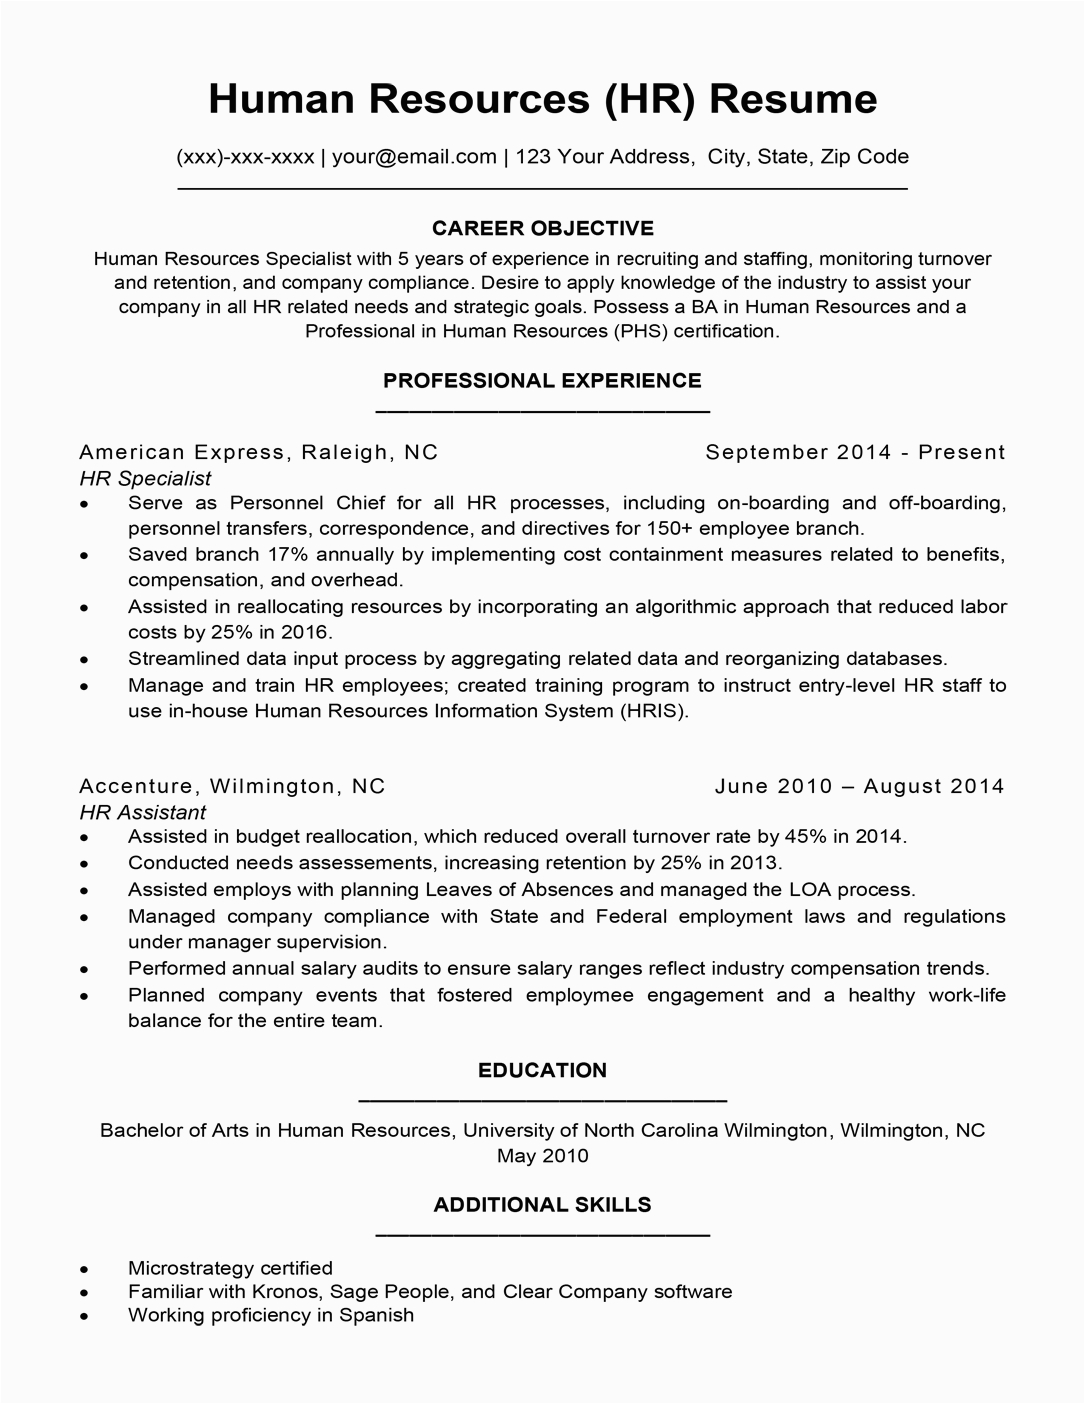 Sample Resume Of An Human Resource Manager Human Resources Resume Sample & Writing Tips